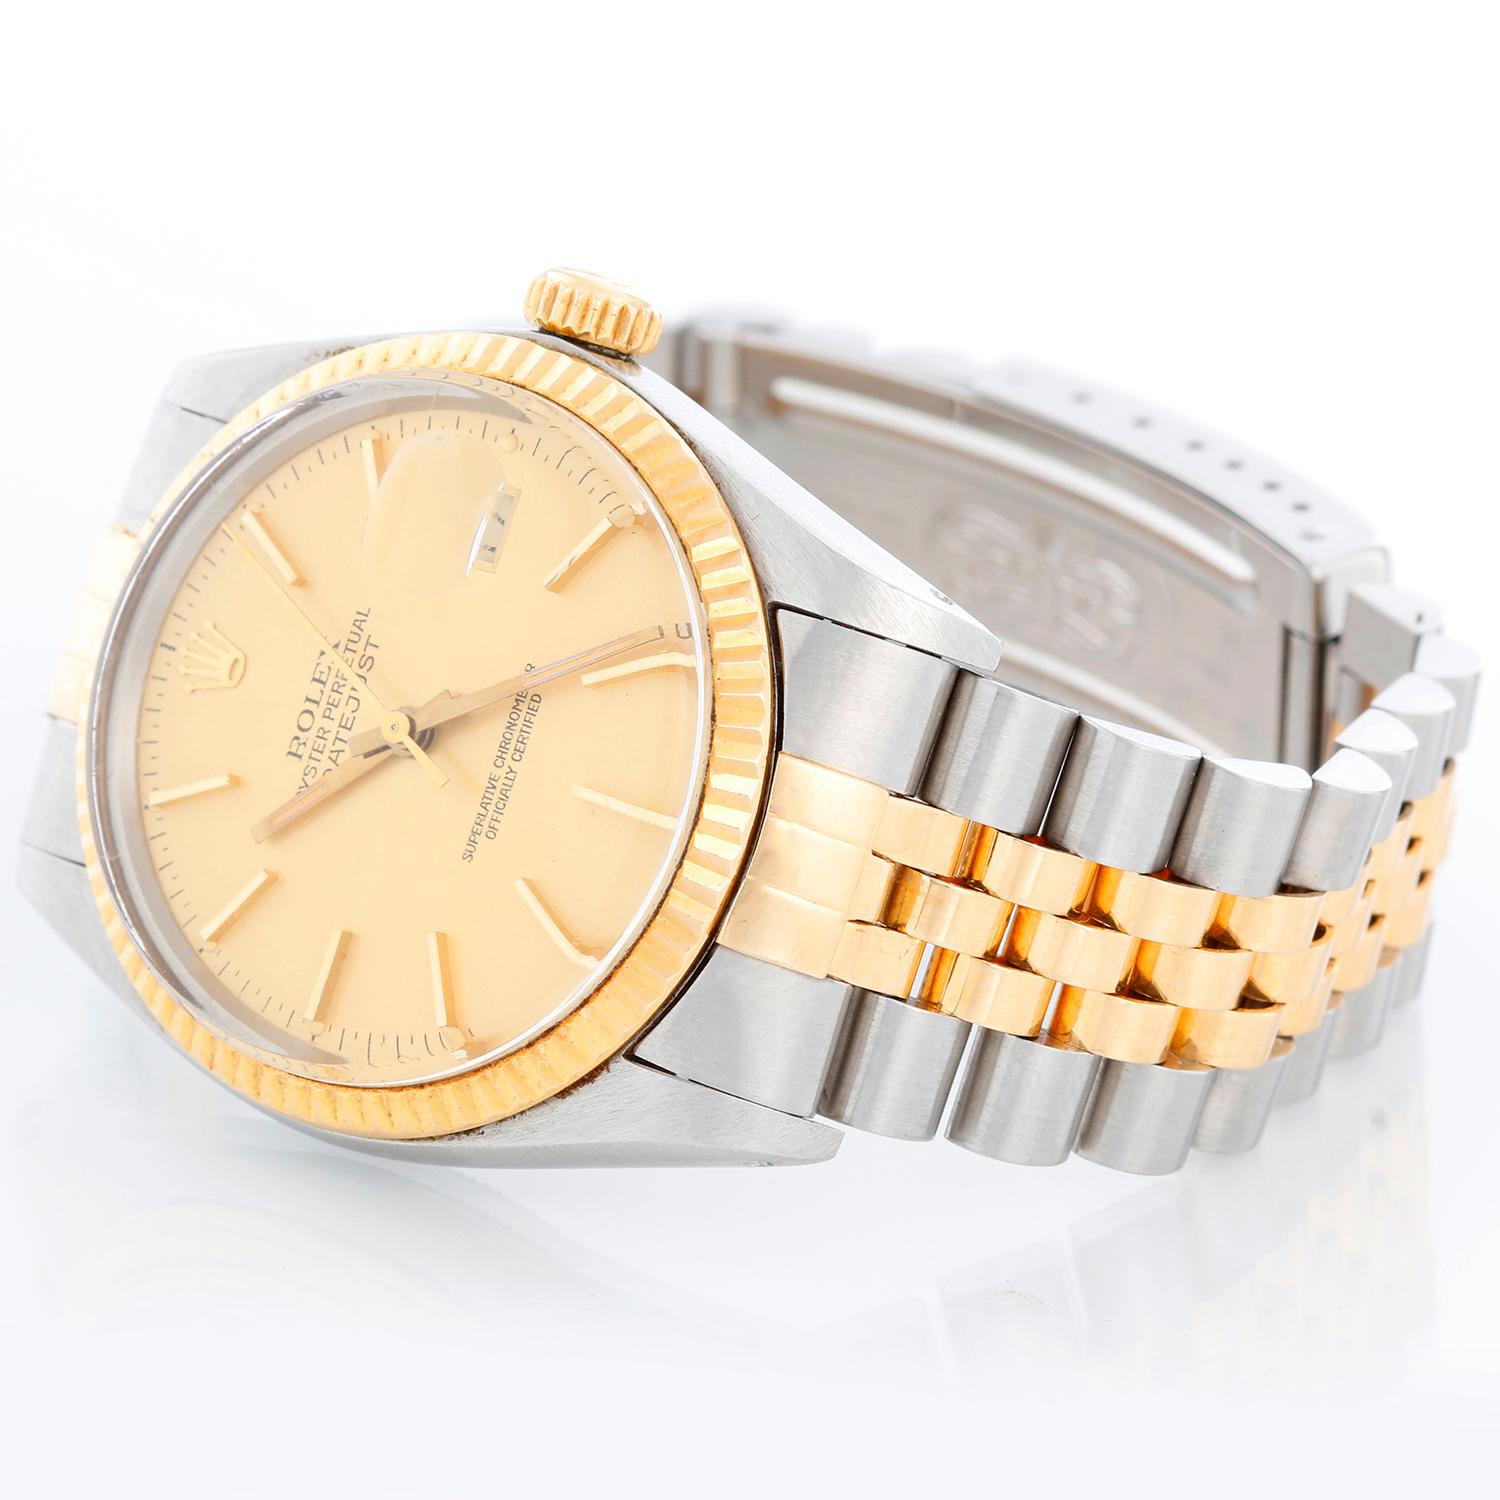 Men's Rolex Datejust 2-Tone Watch 16013 - Automatic winding, 27 jewels, Quickset, acrylic crystal. Stainless steel case with fluted bezel ( 36 mm ). Champagne dial with stick hour markers. Two-tone jubilee bracelet . Pre-owned with custom box.